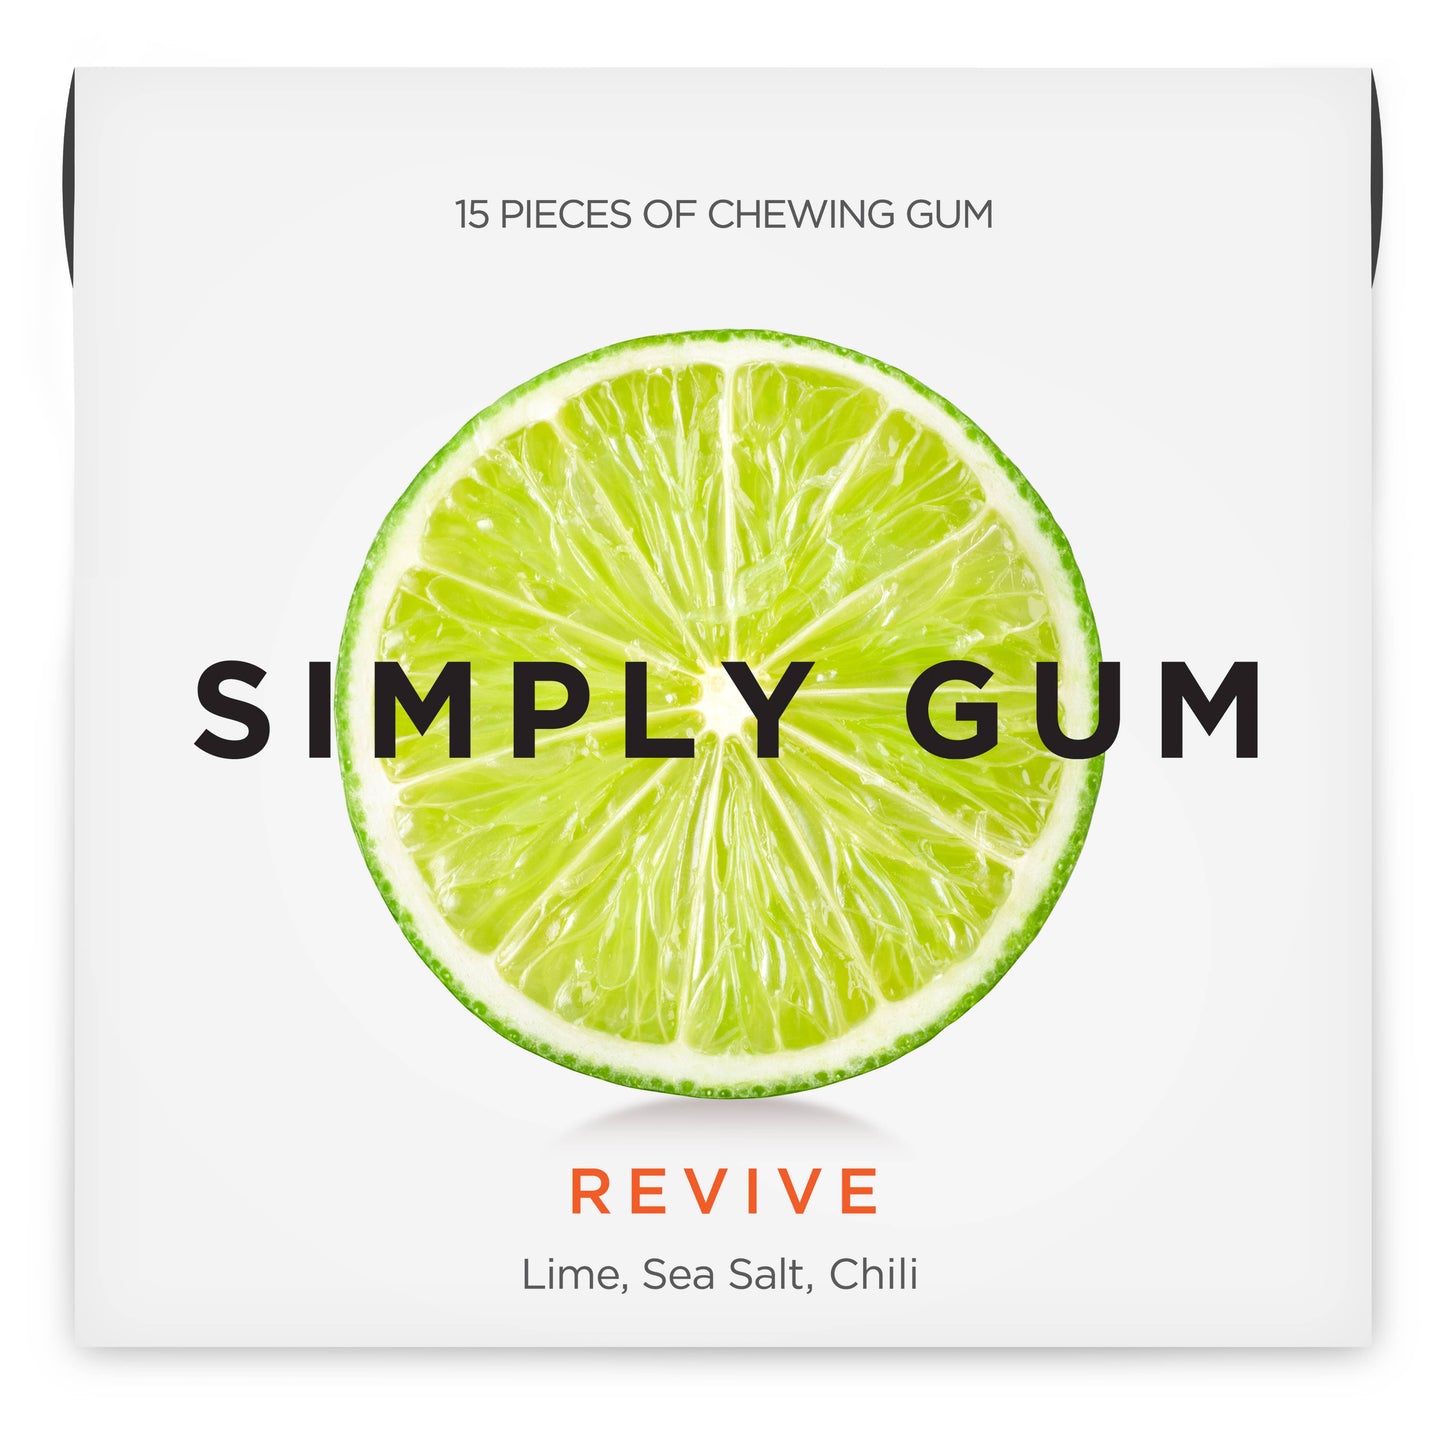 Simply | Chewing Gum - Revive